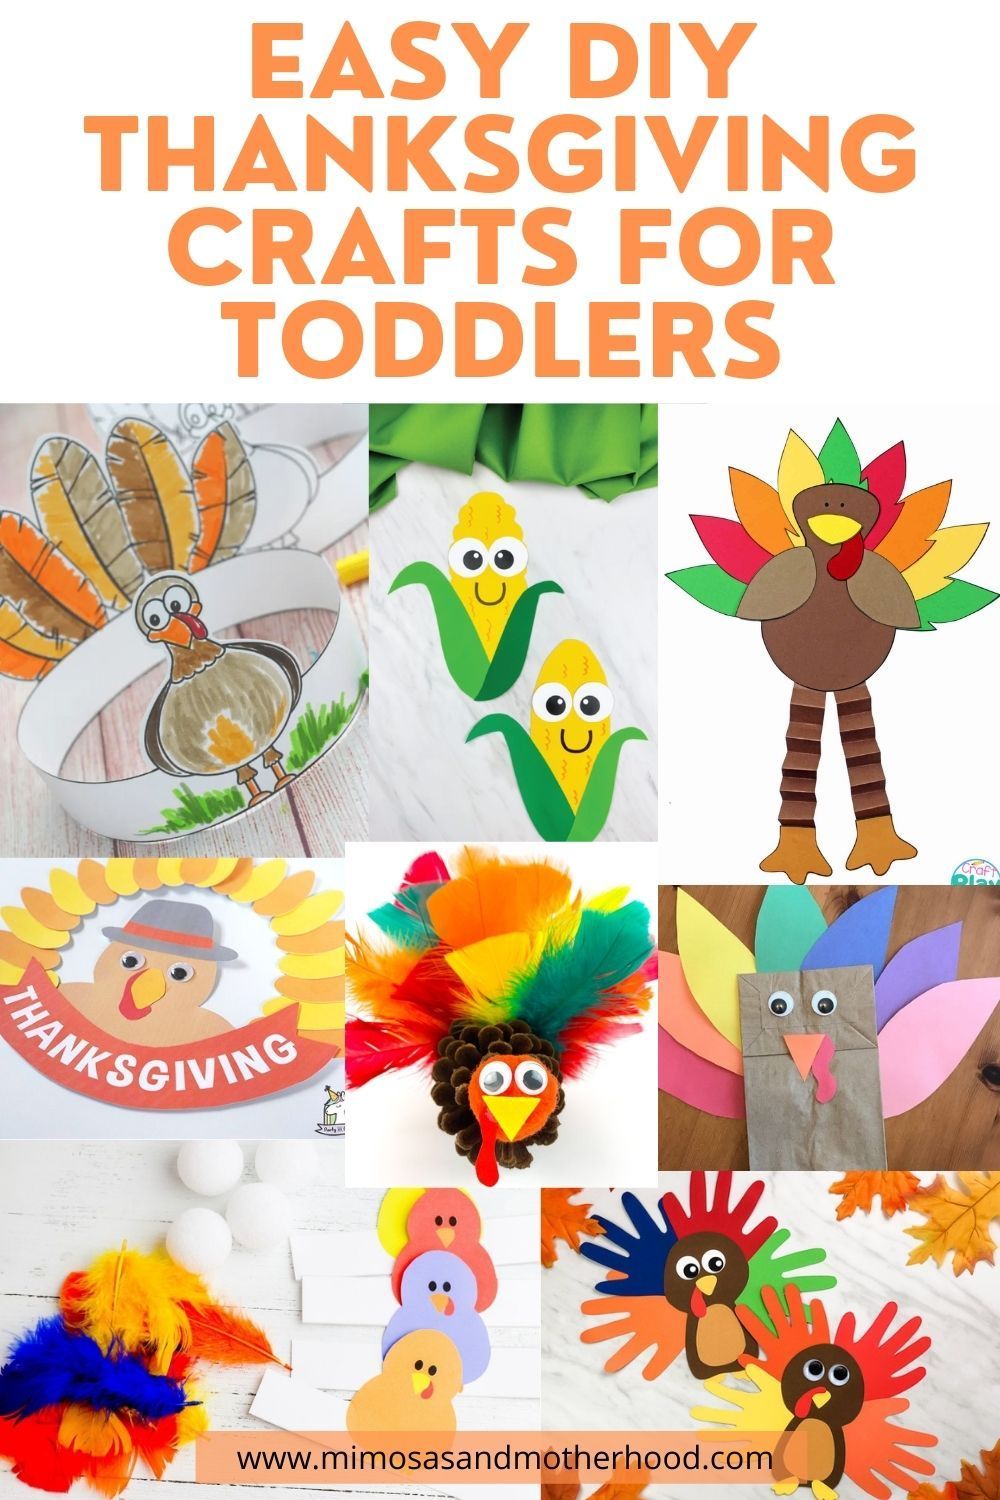 Easy Thanksgiving Crafts for Toddlers ? Mimosas and Motherhood -   18 diy thanksgiving crafts for toddlers ideas